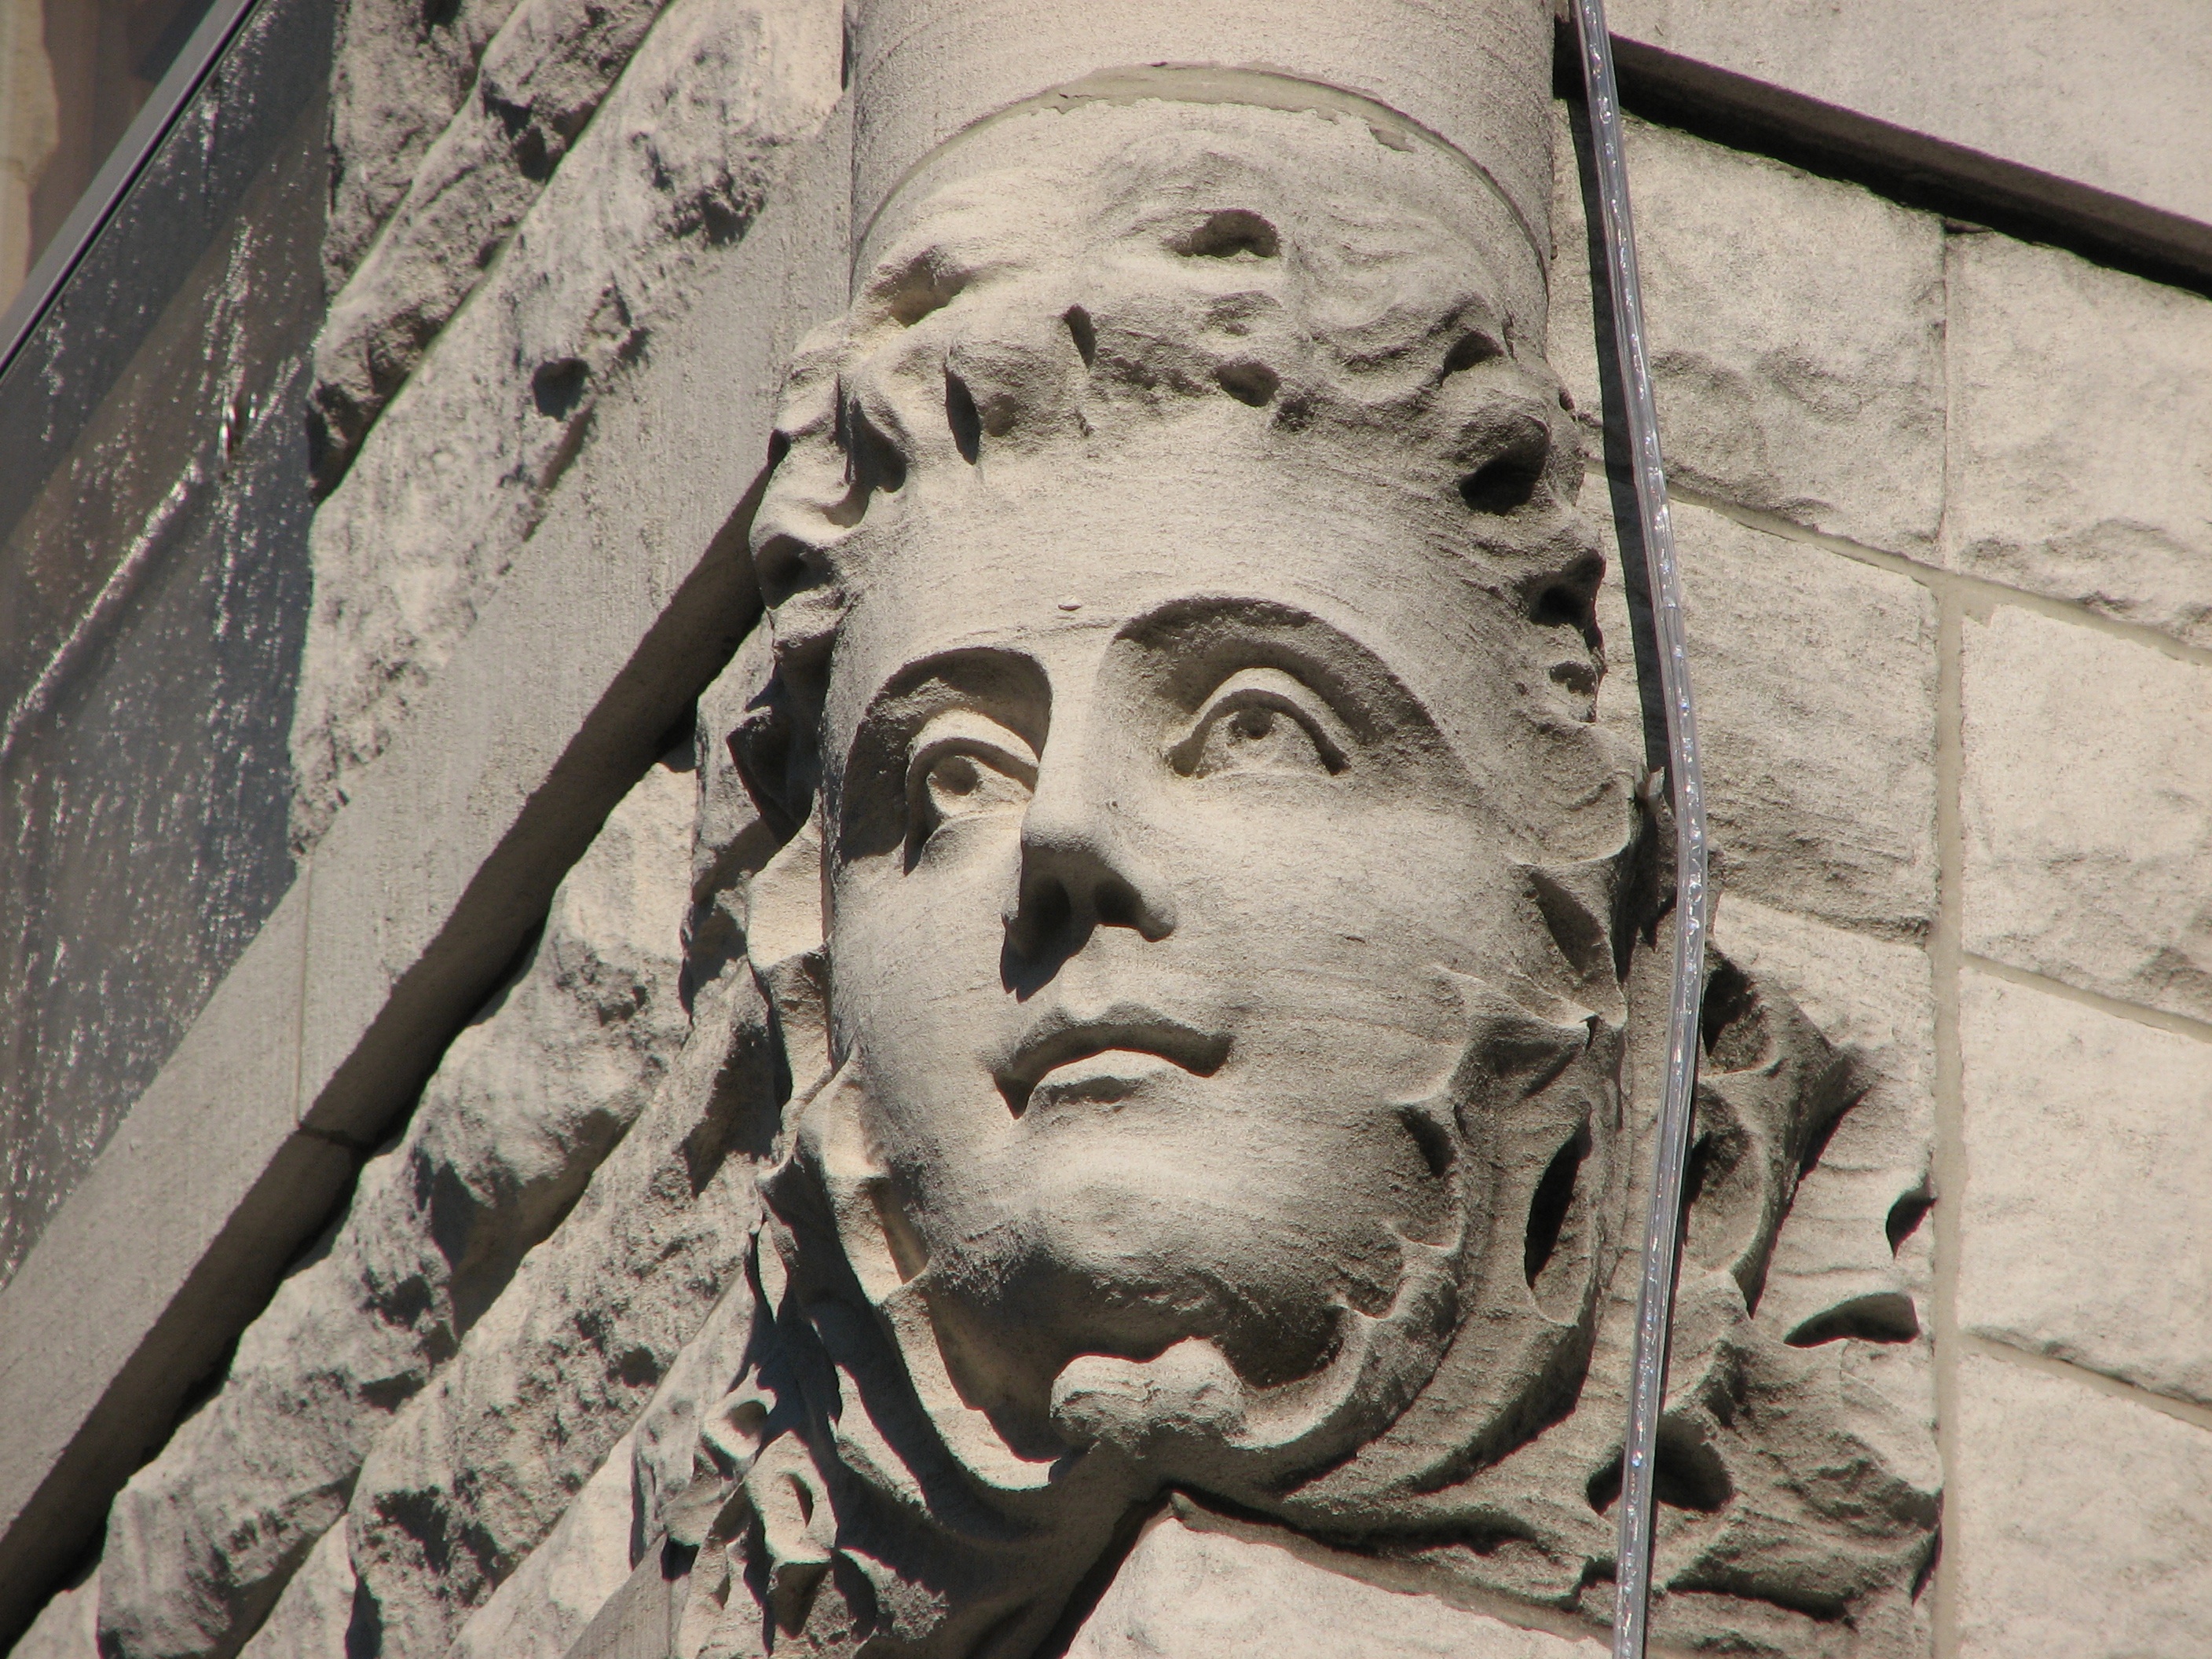 Children's faces ornament the Swain mansion now used as the Ronald McDonald house. | PlanPhilly